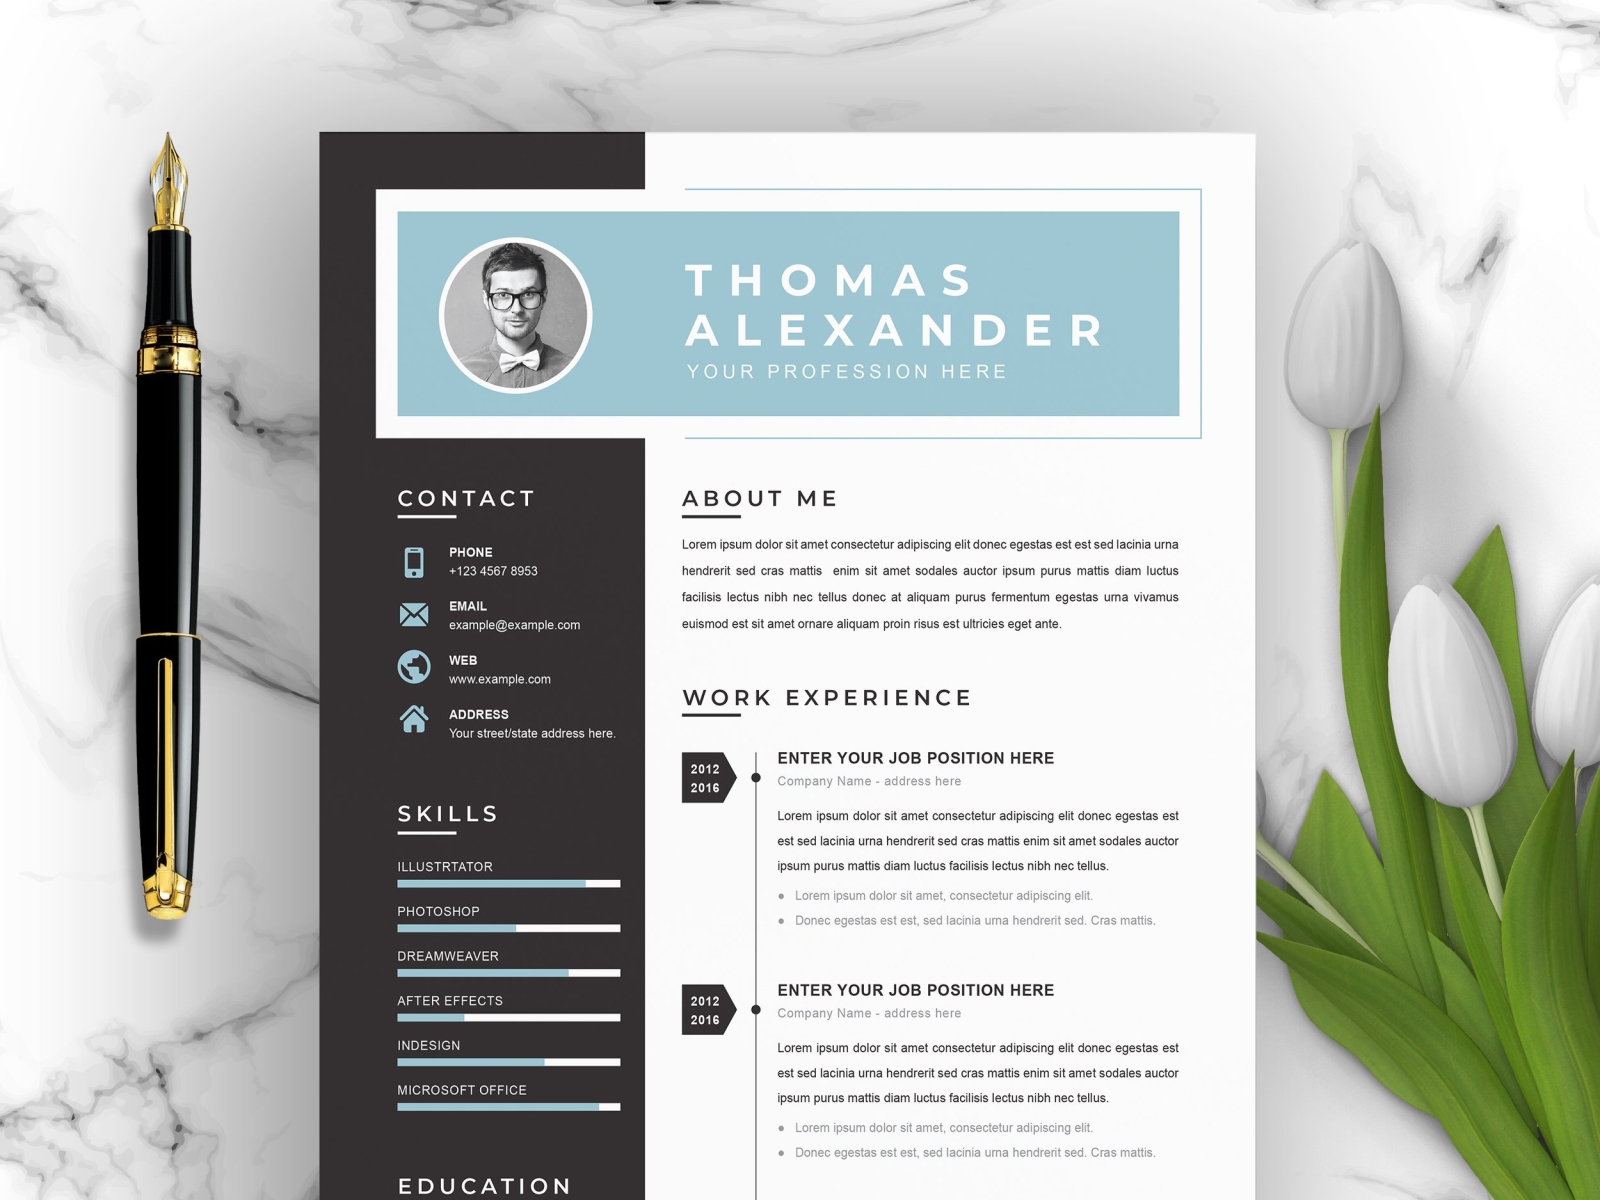 Professional Word Resume/CV Template by Resume Templates on Dribbble